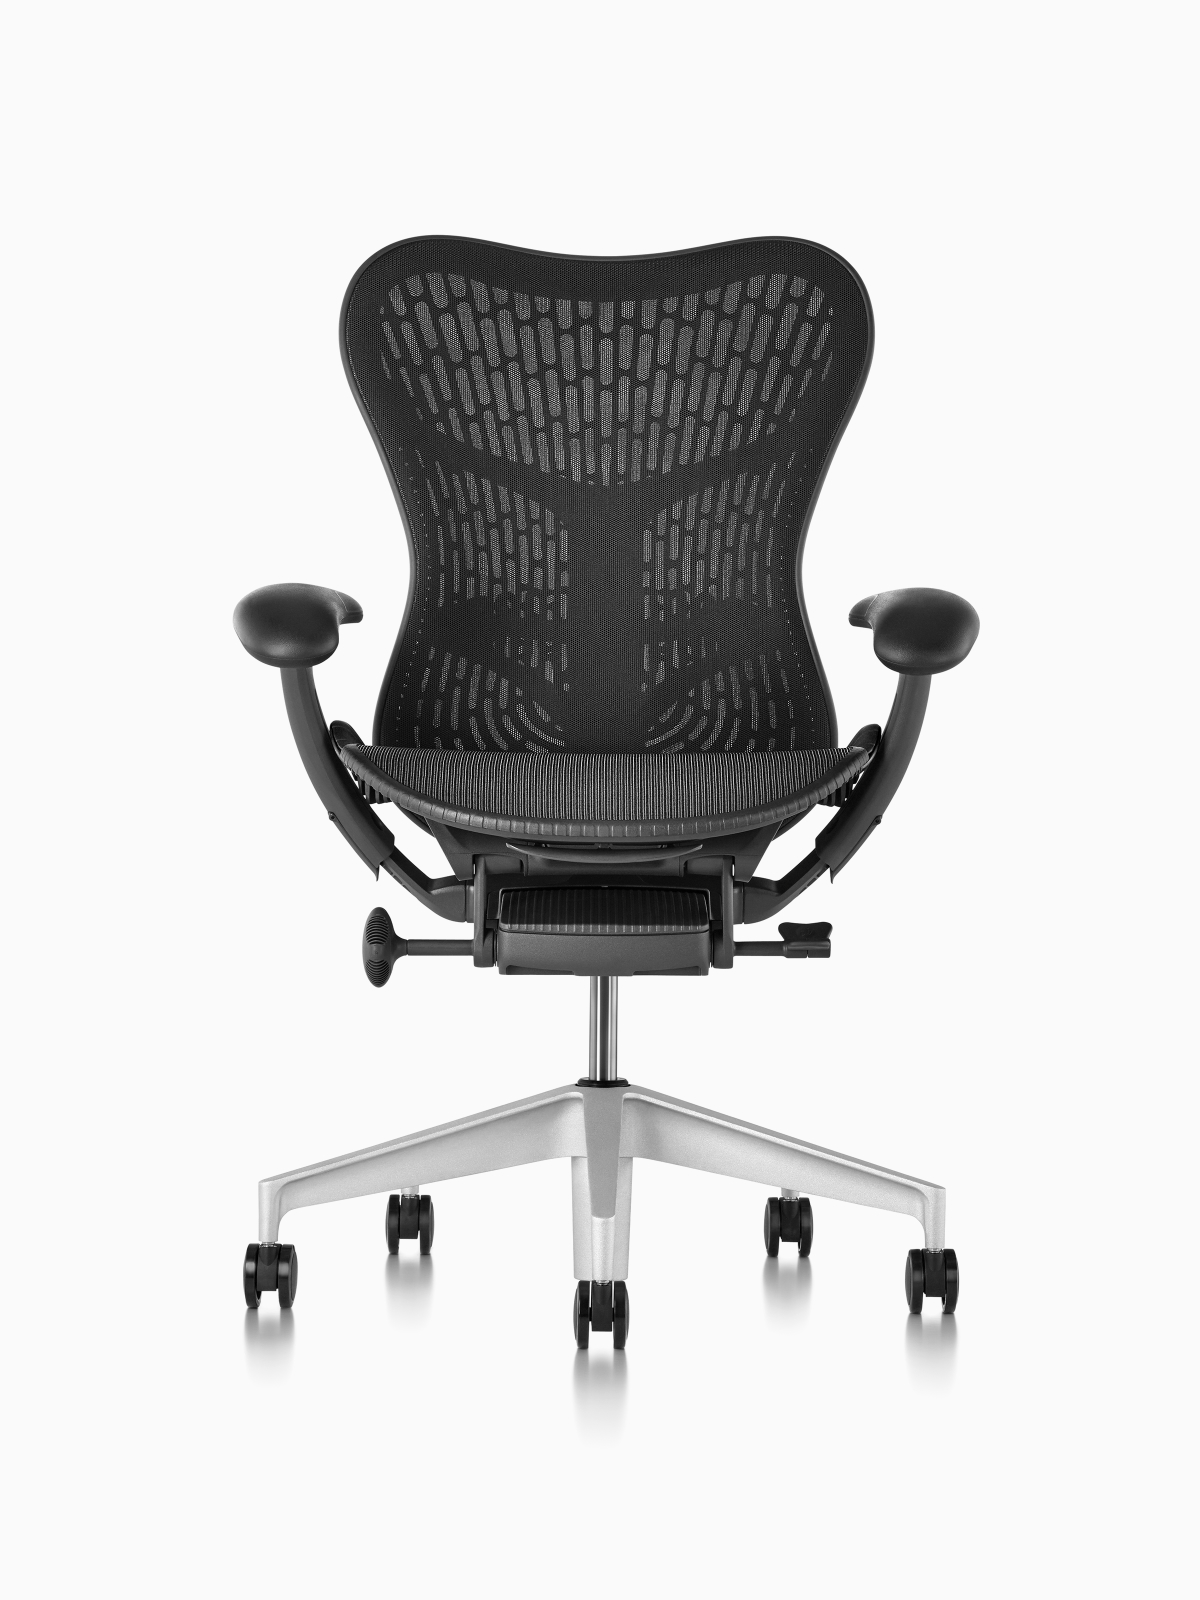 https://www.hermanmiller.com/content/dam/hmicom/page_assets/products/mirra_2_chairs/th_prd_mirra_2_chairs_office_chairs_fn.jpg